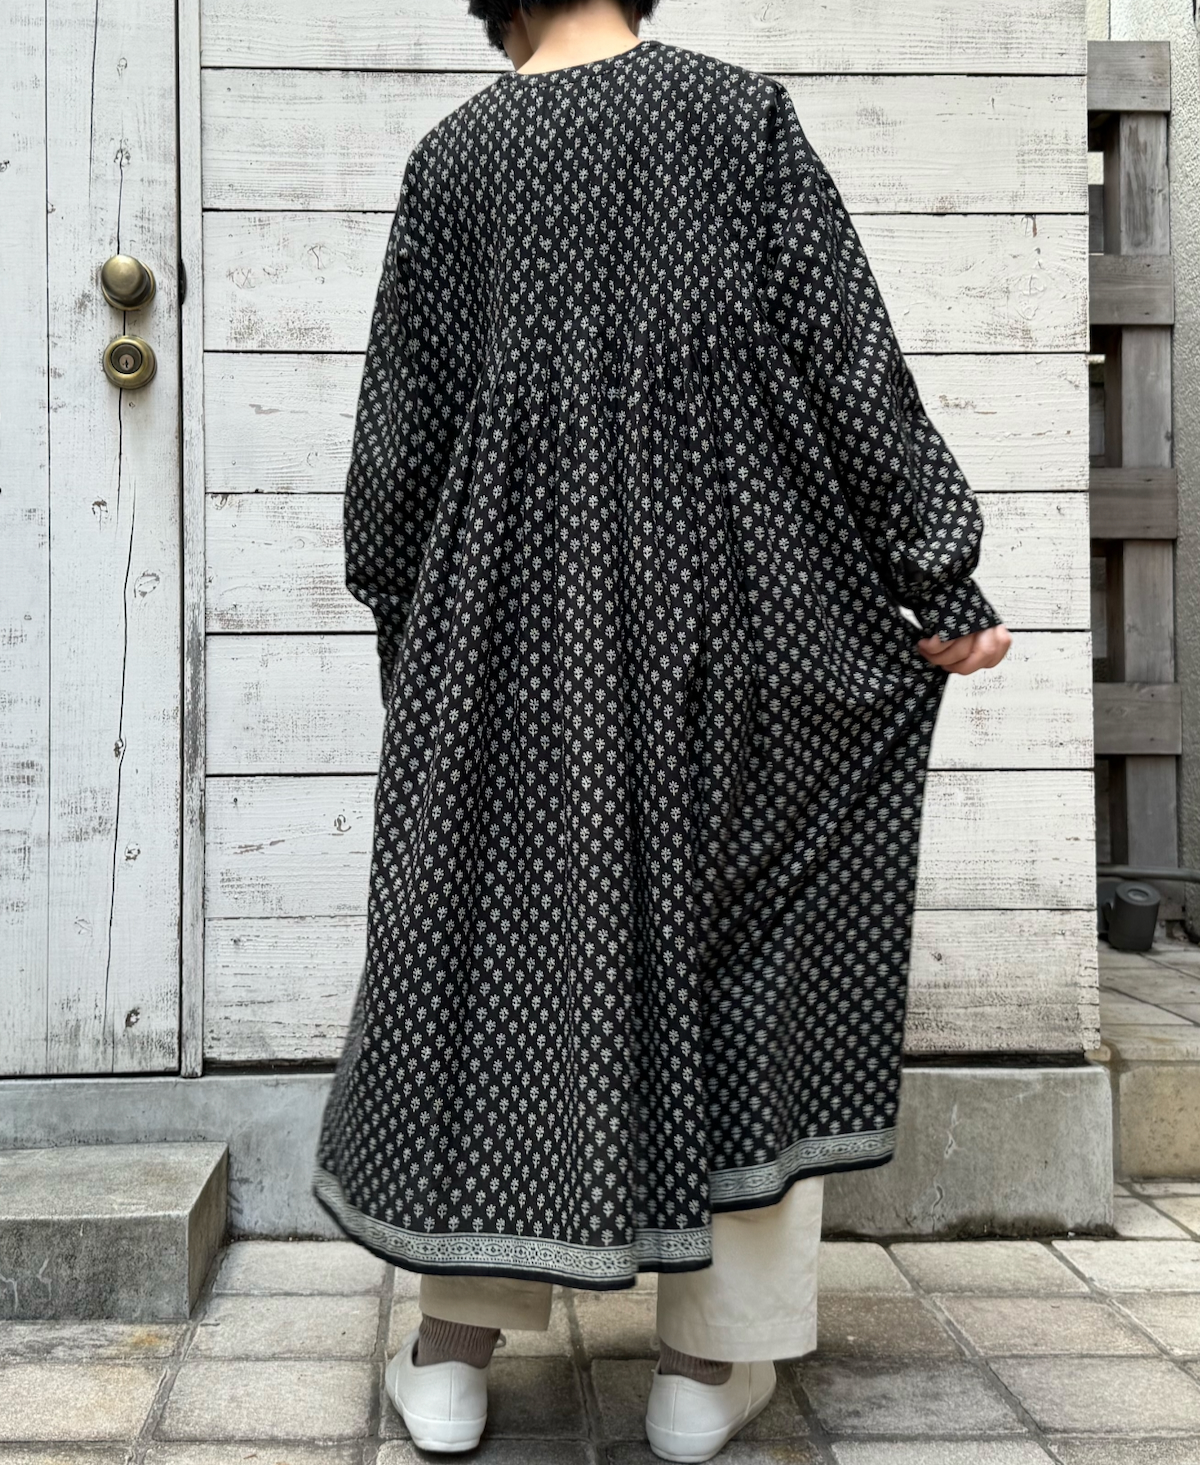 NMDS24182 (ワンピース) 80'S COTTON VOILE SMALL FLOWER BLOCK PRINT V-NECK FRONT OPENING DRESS WITH MINI PINTUCK